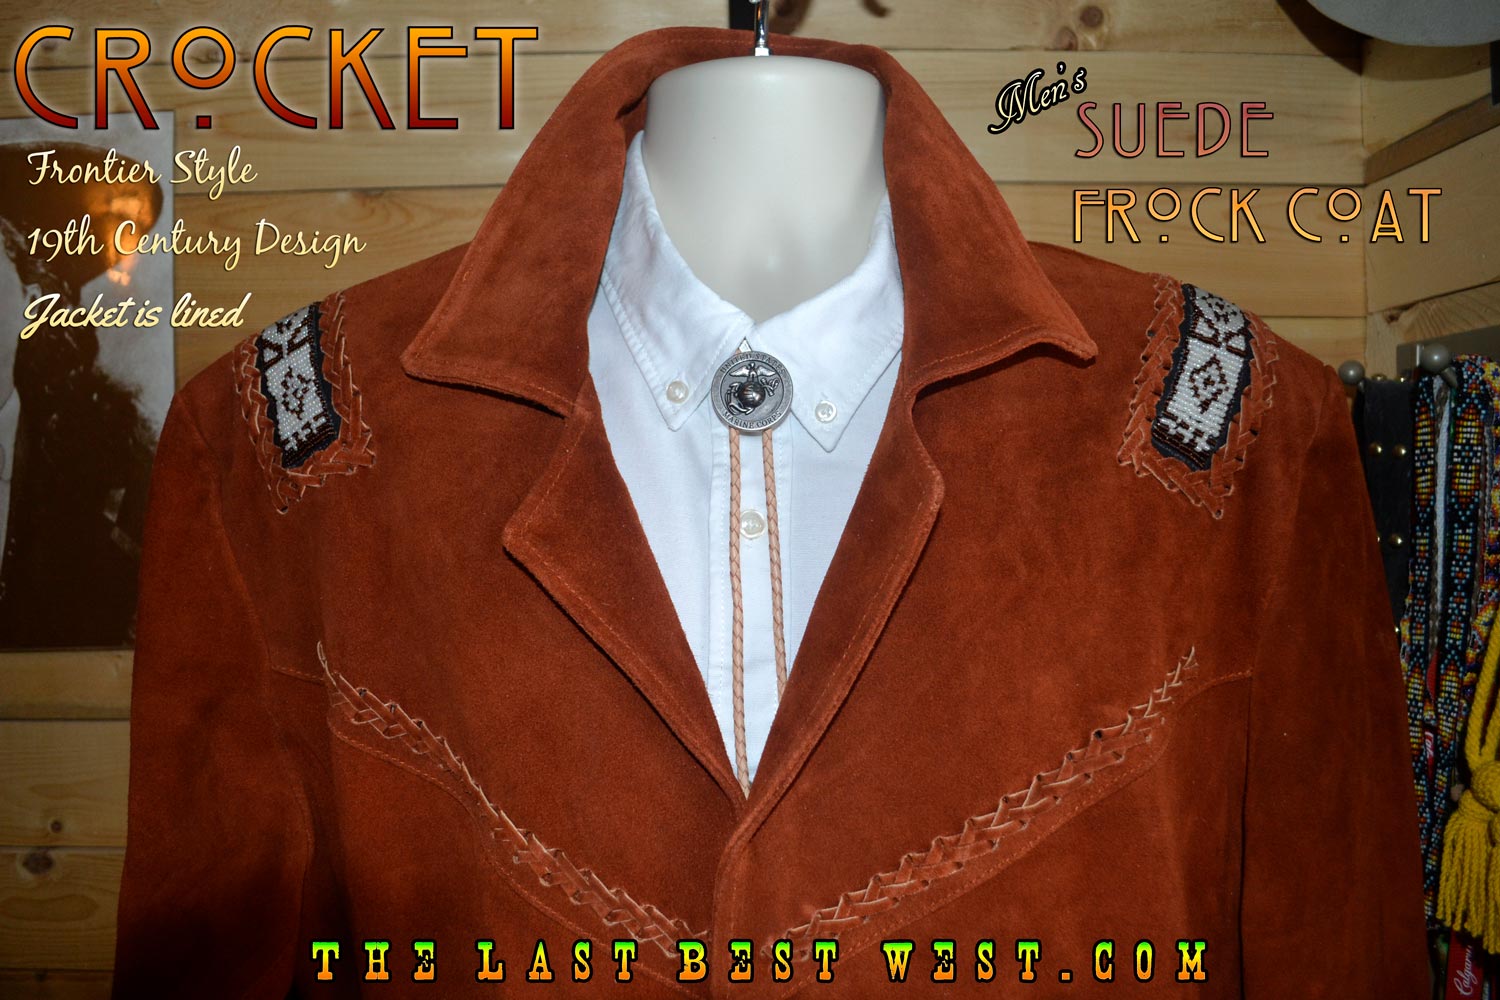 Men's Suede Jackets and Coats - The Jacket Maker